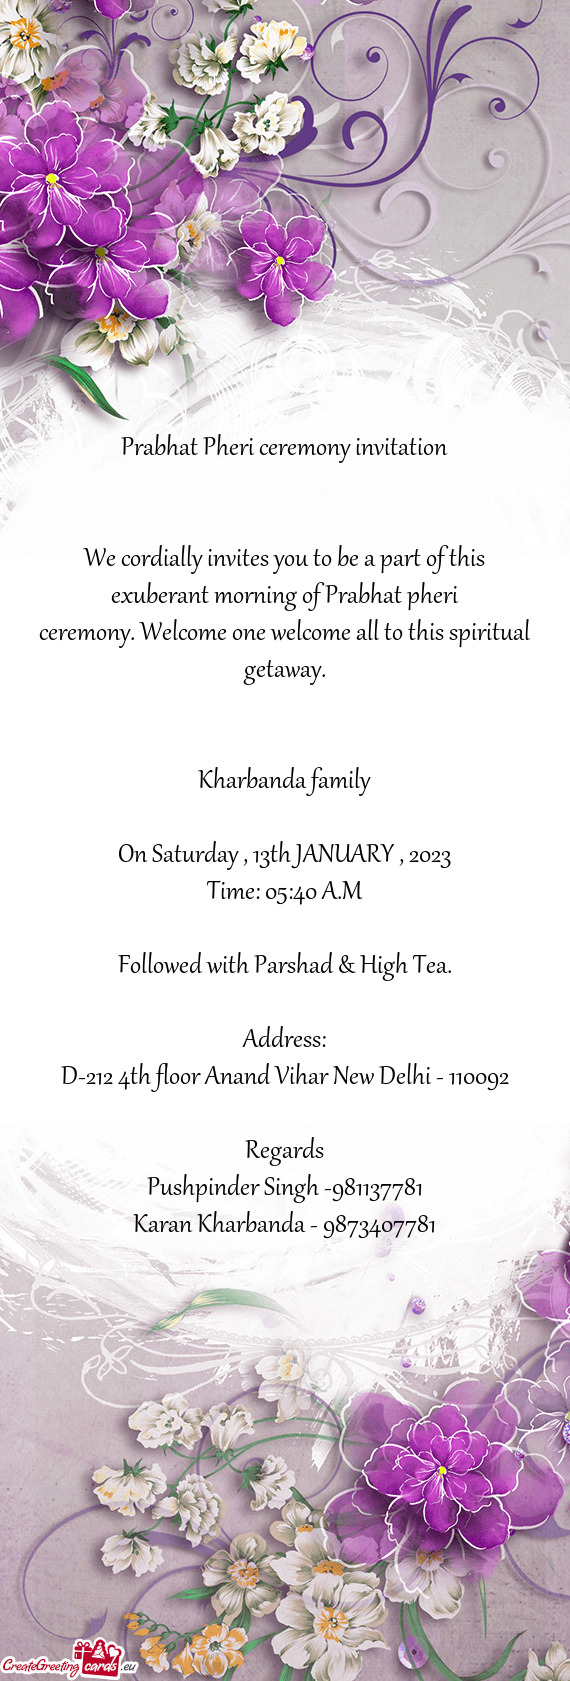 We cordially invites you to be a part of this exuberant morning of Prabhat pheri